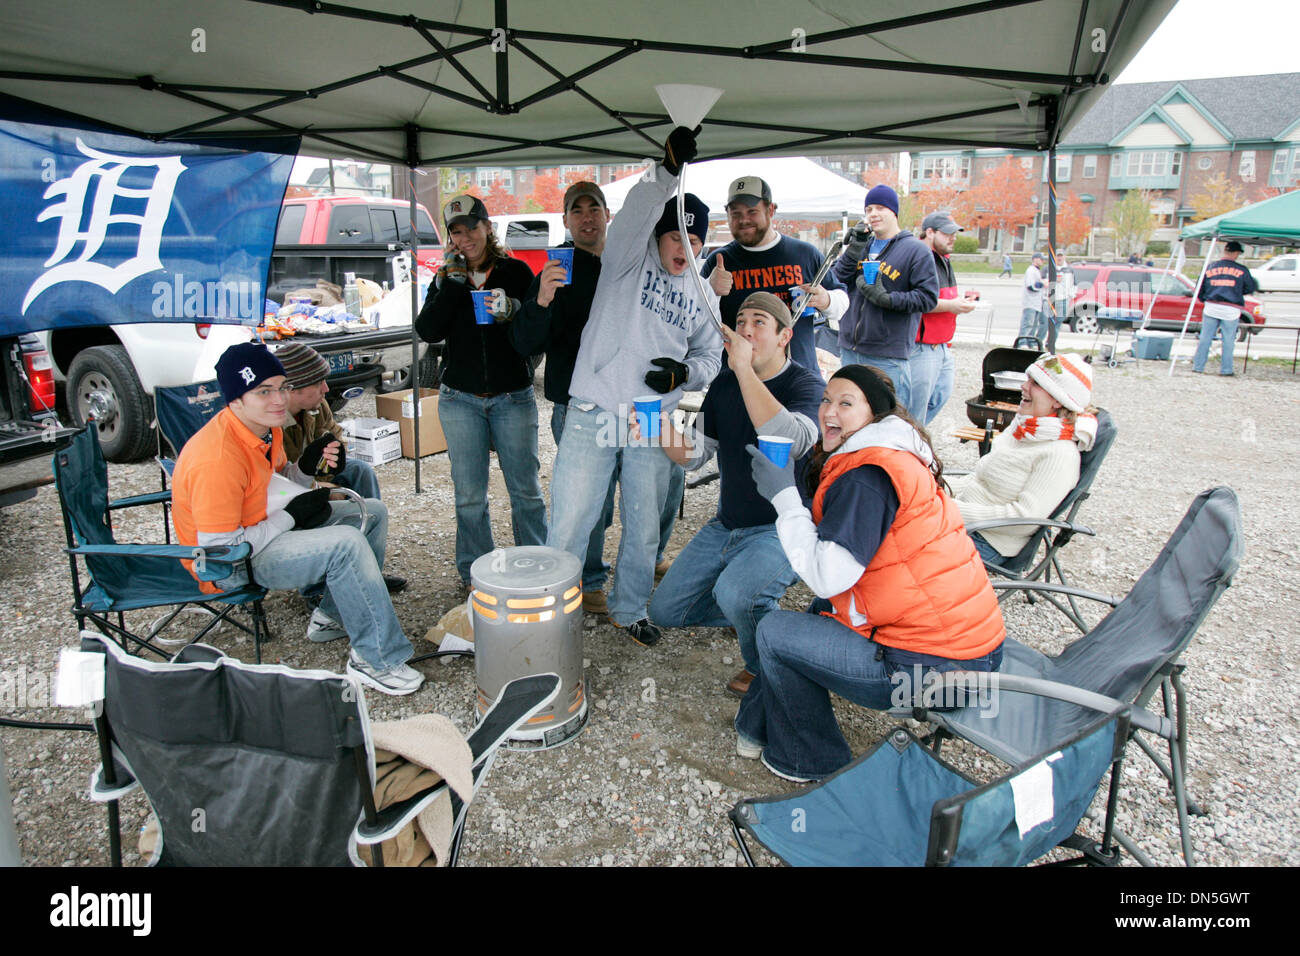 Oct 21, 2006; Detroit, MI, USA; VINCE BARRY, PJ  WYMAN and  MARK HEBERT, a group of Tiger fans from Dearborn who are life long friends all gathered at a parking lot on Woodward ave. near the stadium for a all day and night tailgate party.   Mandatory Credit: Photo by Charles V. Tines/Detroit News/ZUMA Press. (©) Copyright 2006 by Detroit News Stock Photo